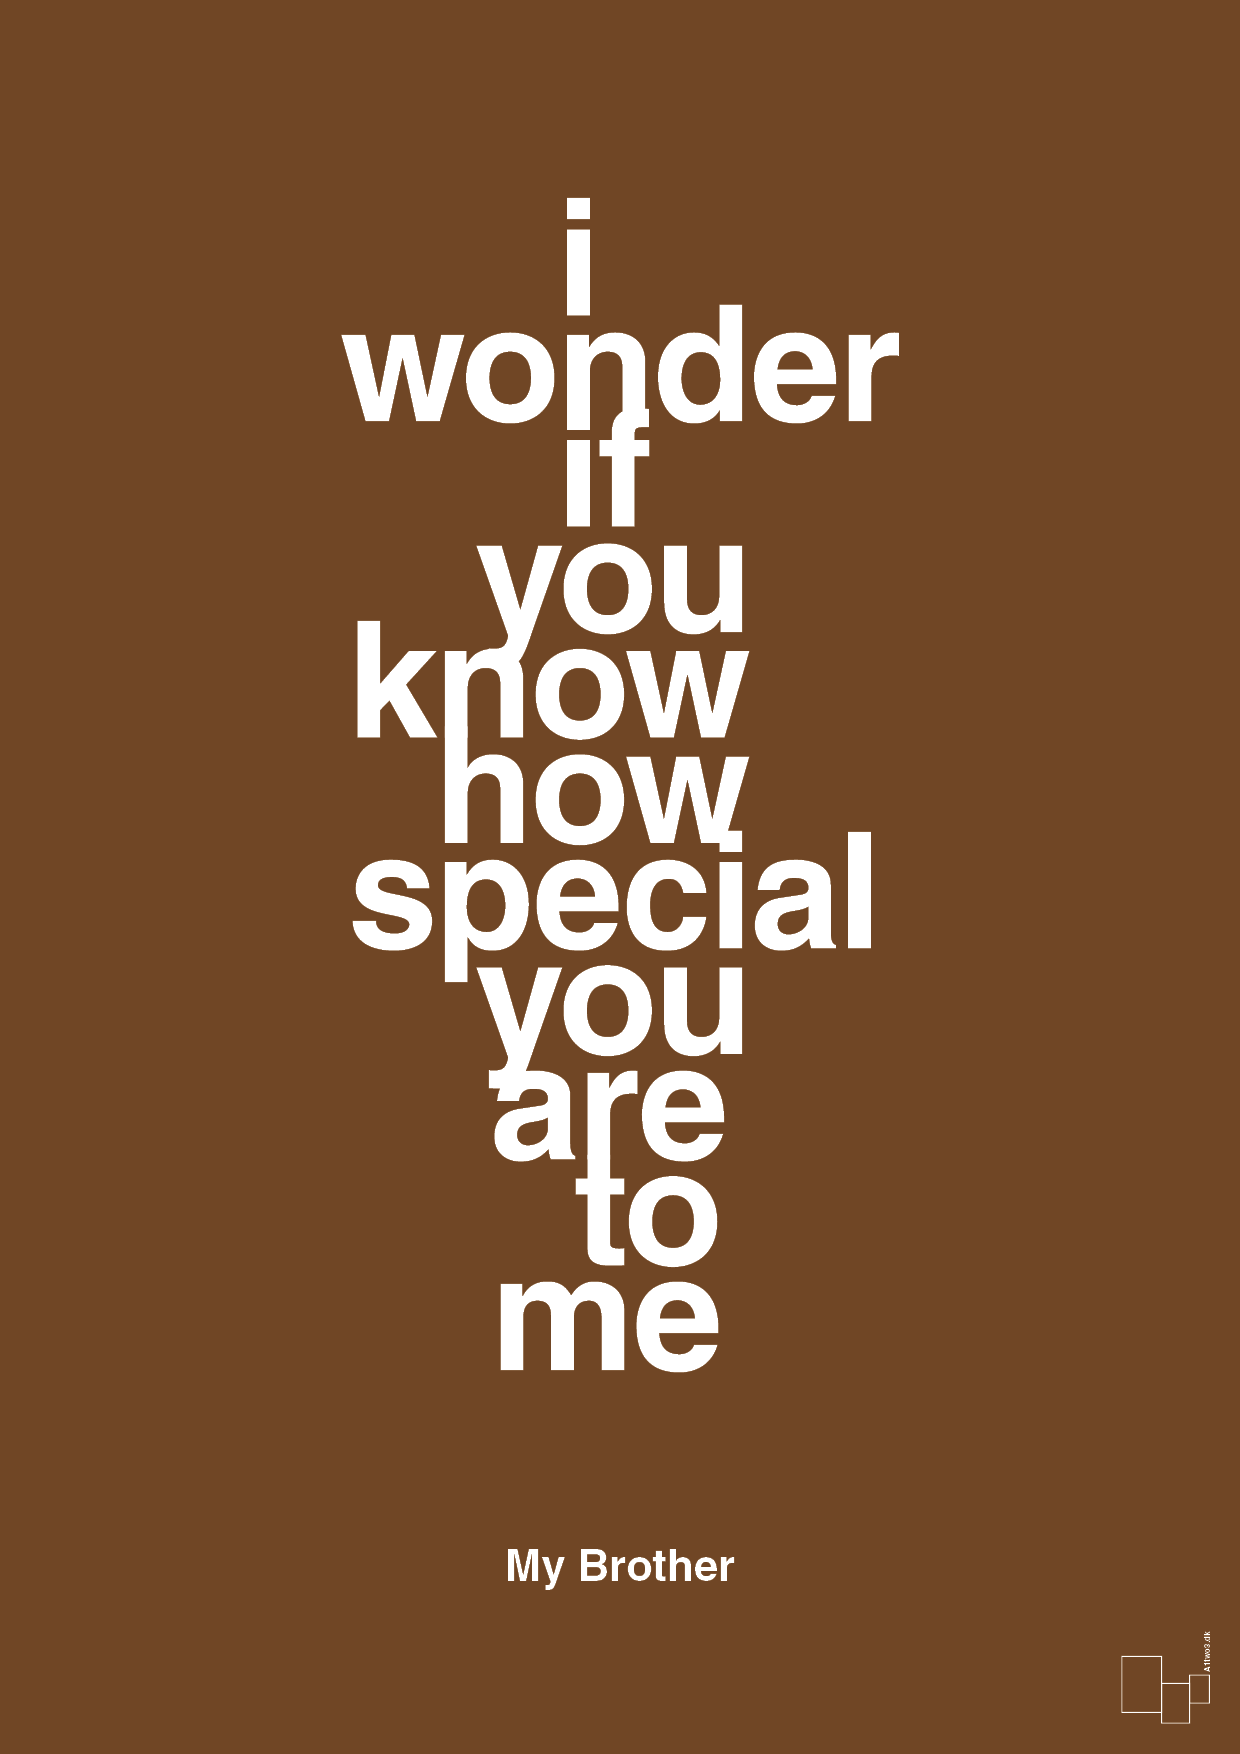 my brother - i wonder if you know how special you are to me - Plakat med Citater i Dark Brown